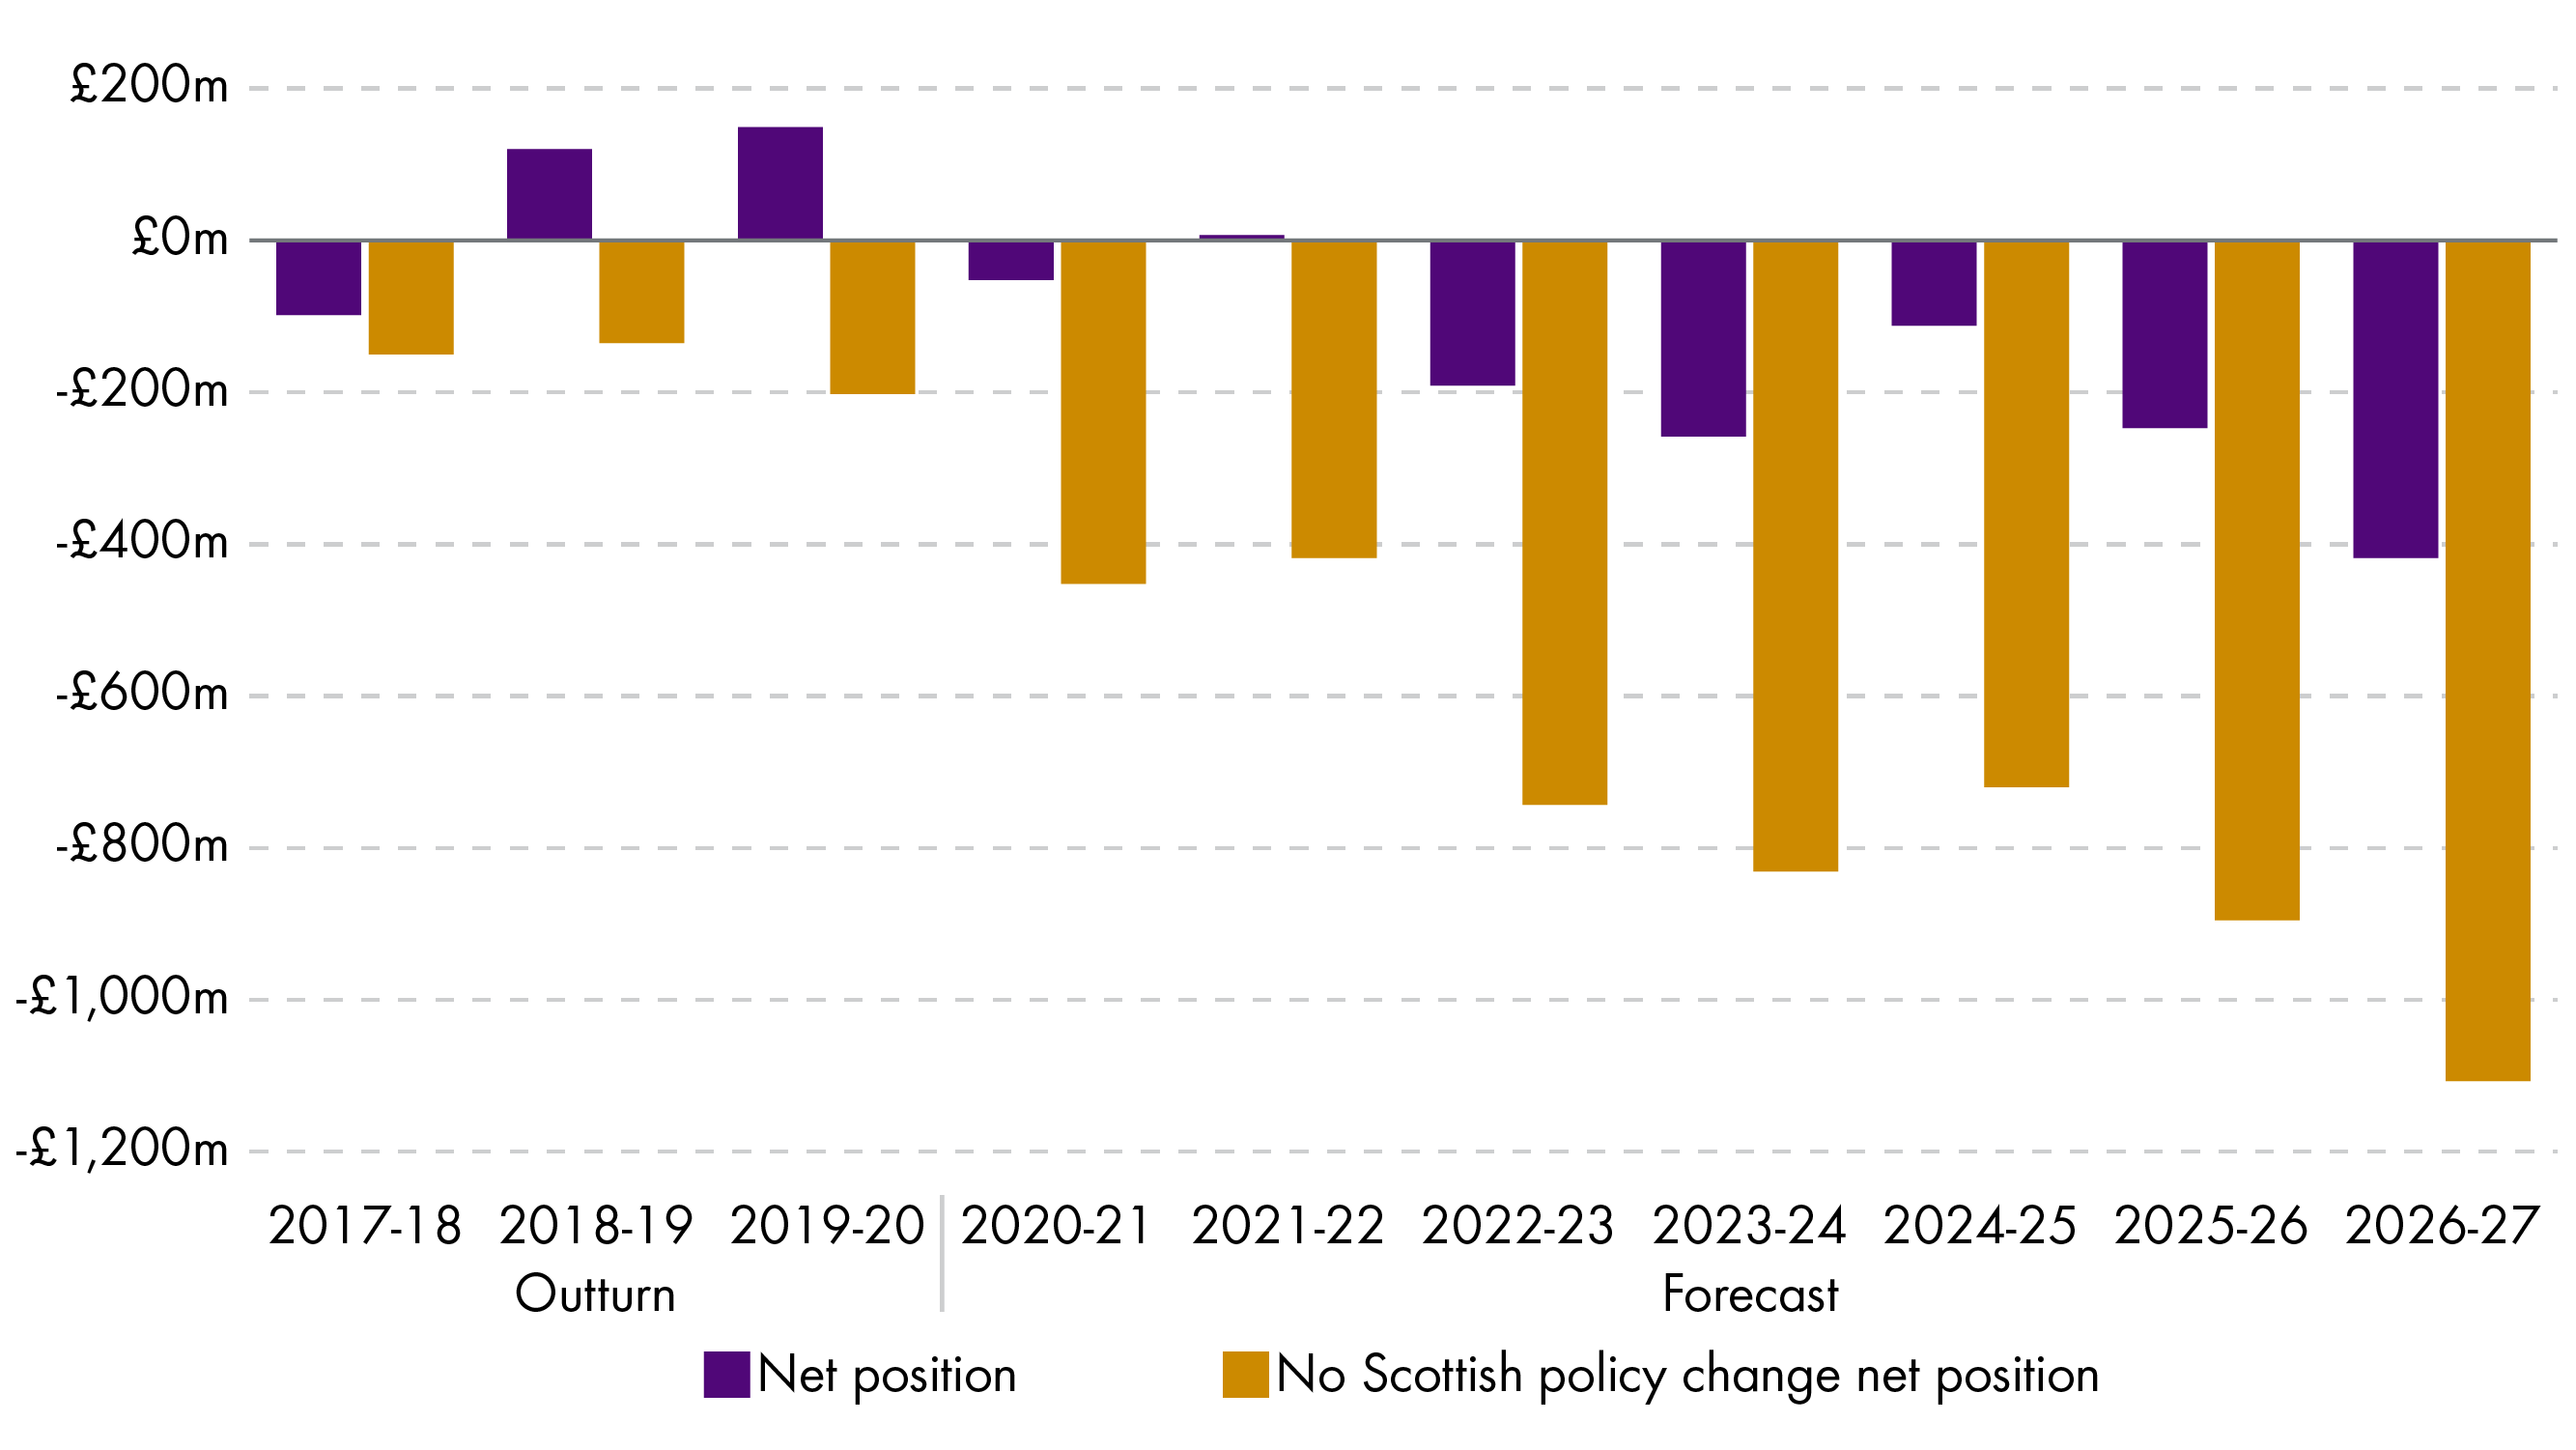 Figure 3 shows the income tax net position for each financial year from 2017-18 to 2026-27 in comparison to illustrative examples of what the position would be had there been no policy changes to Scottish income tax. This is based on outturn figures up to the end of 2019-20 and forecasts thereafter. The net position for both measures is forecast to be negative from 2022-23 onwards with the gap between them expected to increase year-on-year such that the net position by 2026-27 is forecast to be reduce by just over £400 million with the Scottish Government policy changes and around £1.1 billion without.